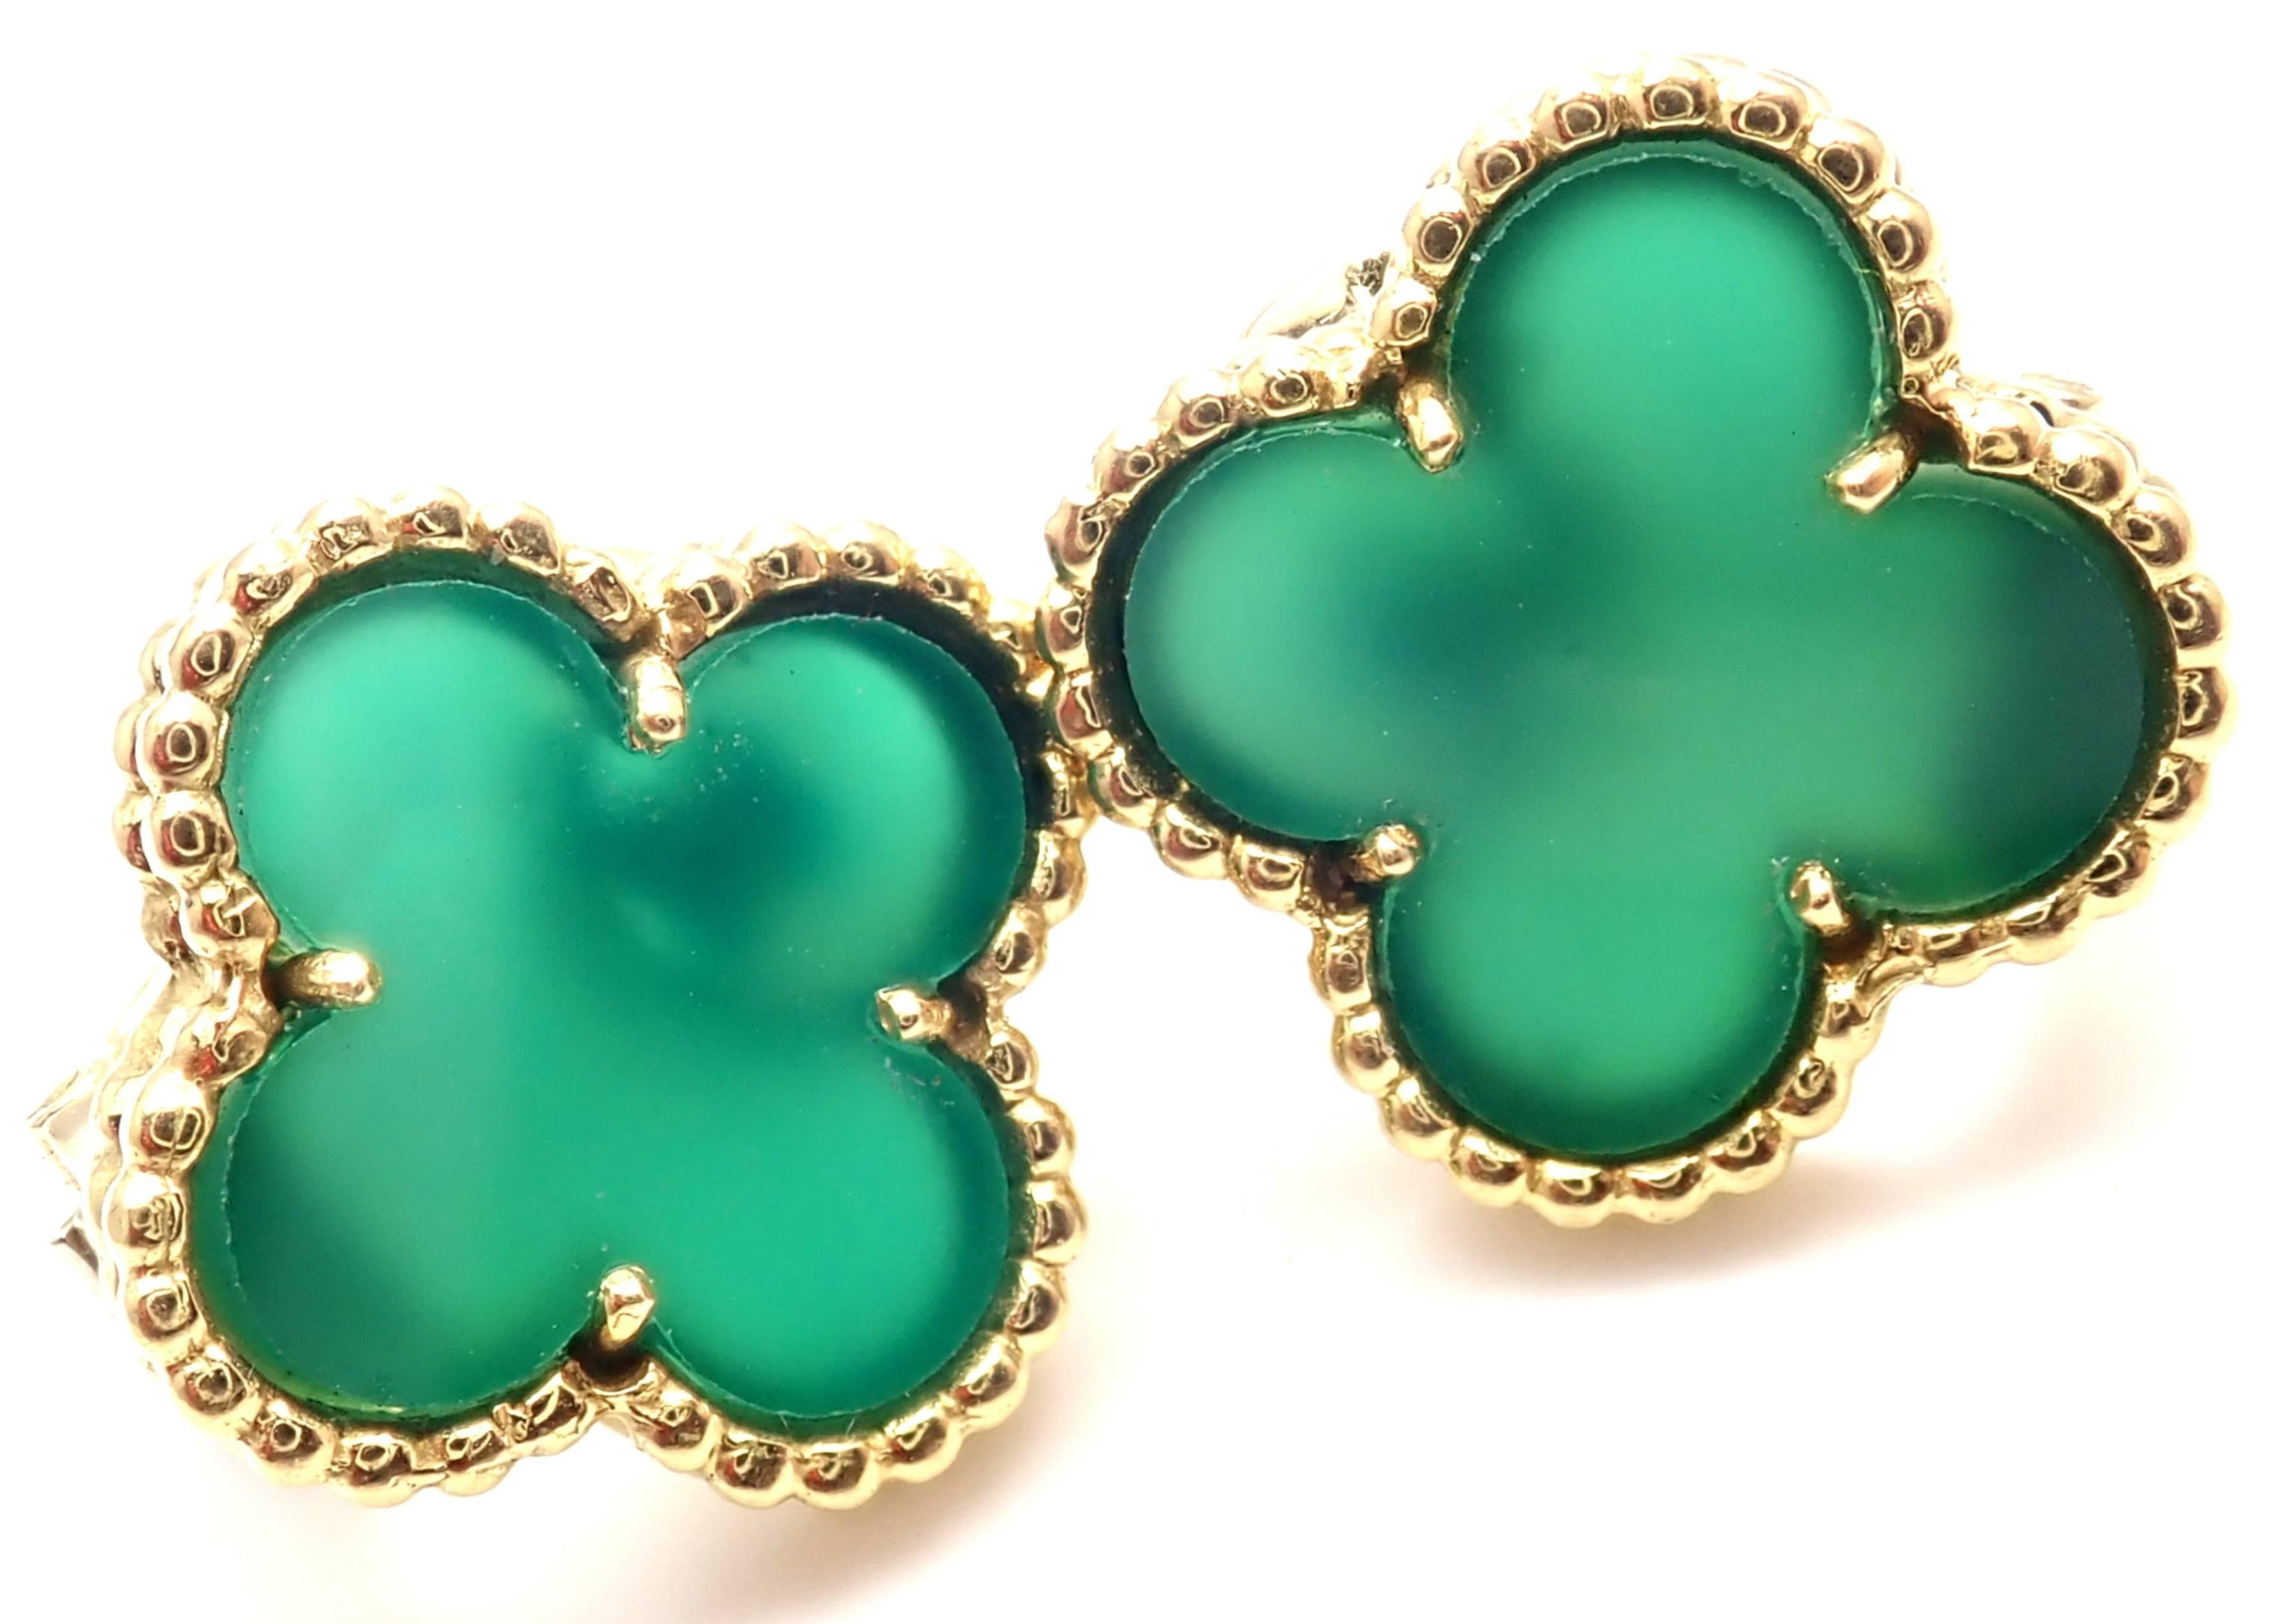 18k Yellow Gold Vintage Alhambra Green Chalcedony Earrings by Van Cleef & Arpels. 
With 2 green chalcedony stones: 15mm each.
These earrings are for pierced ears.
These earrings come with Van Cleef & Arpels service paper from VCA store.
Details: